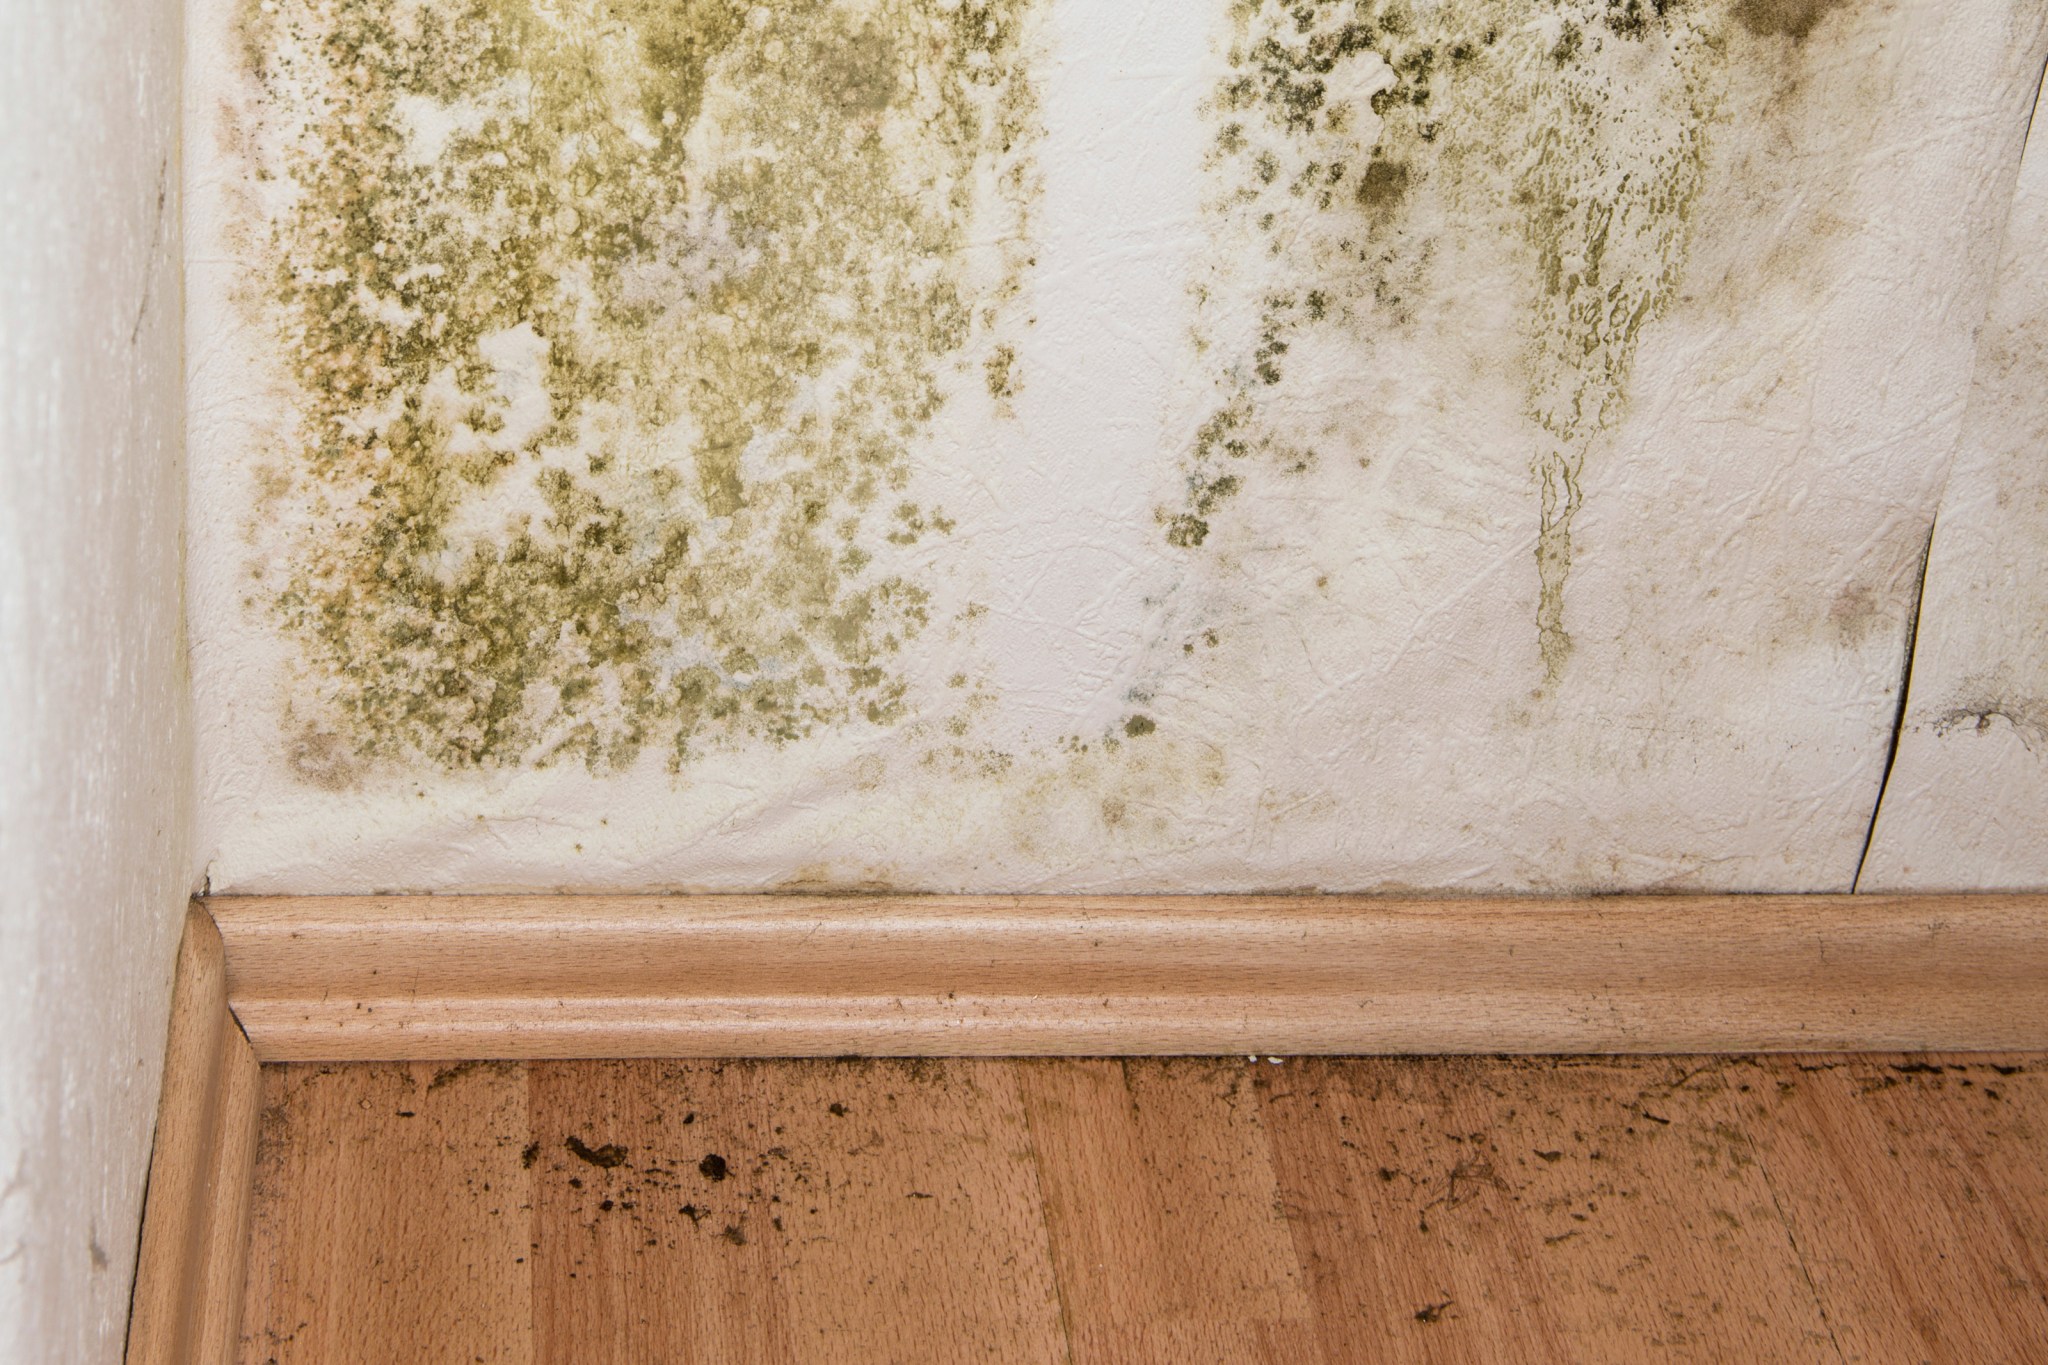 A Complete Guide To Identifying And Getting Rid Of Mold